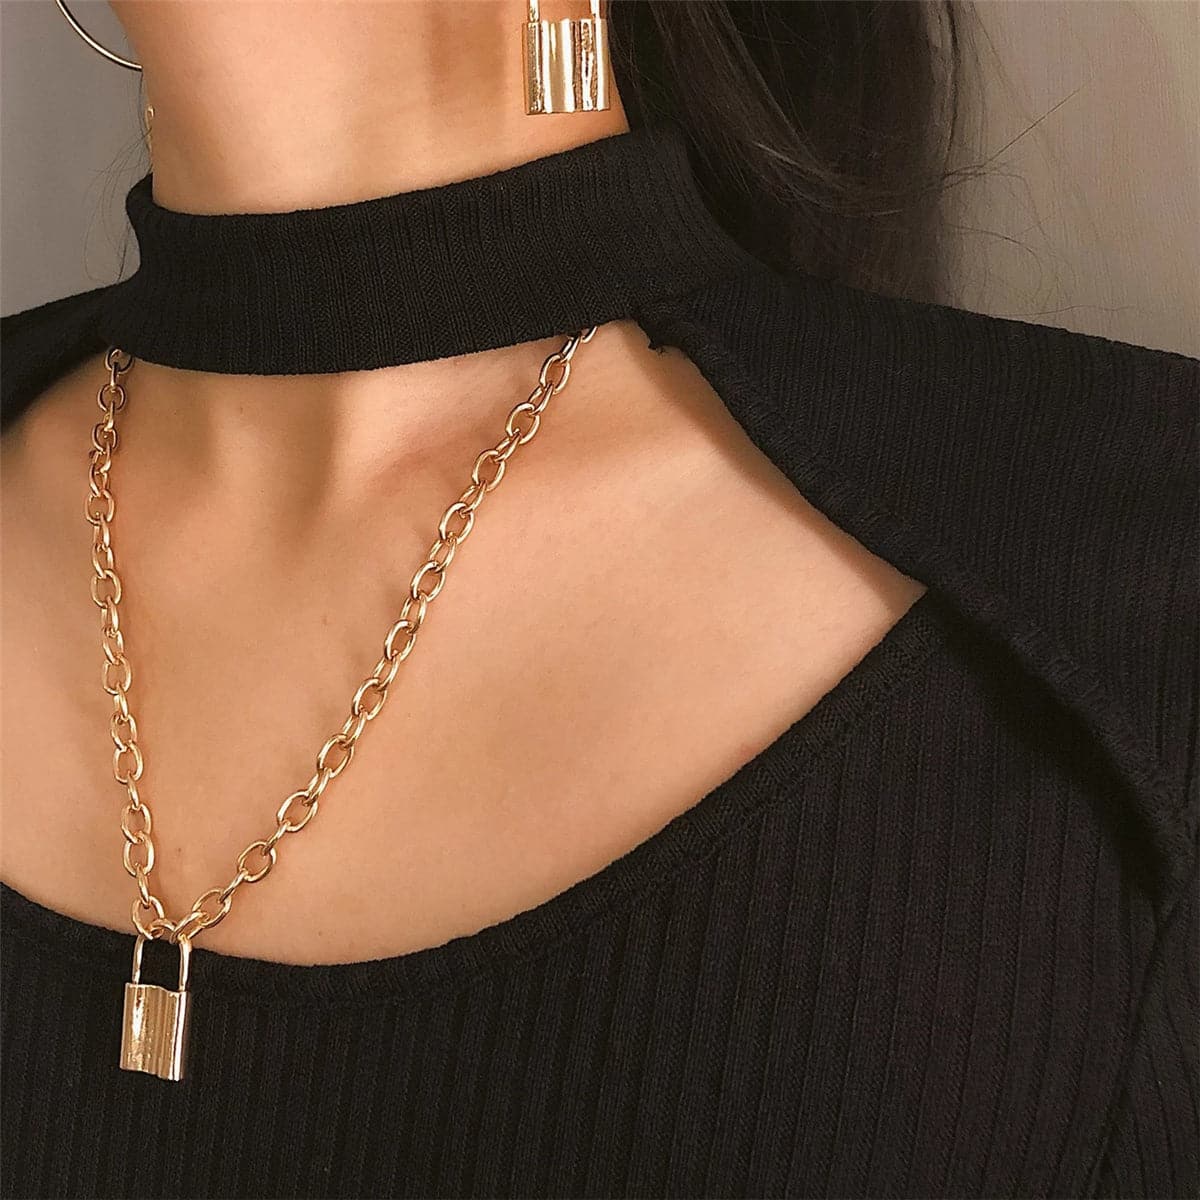 18K Gold-Plated Lock Pendant Necklace